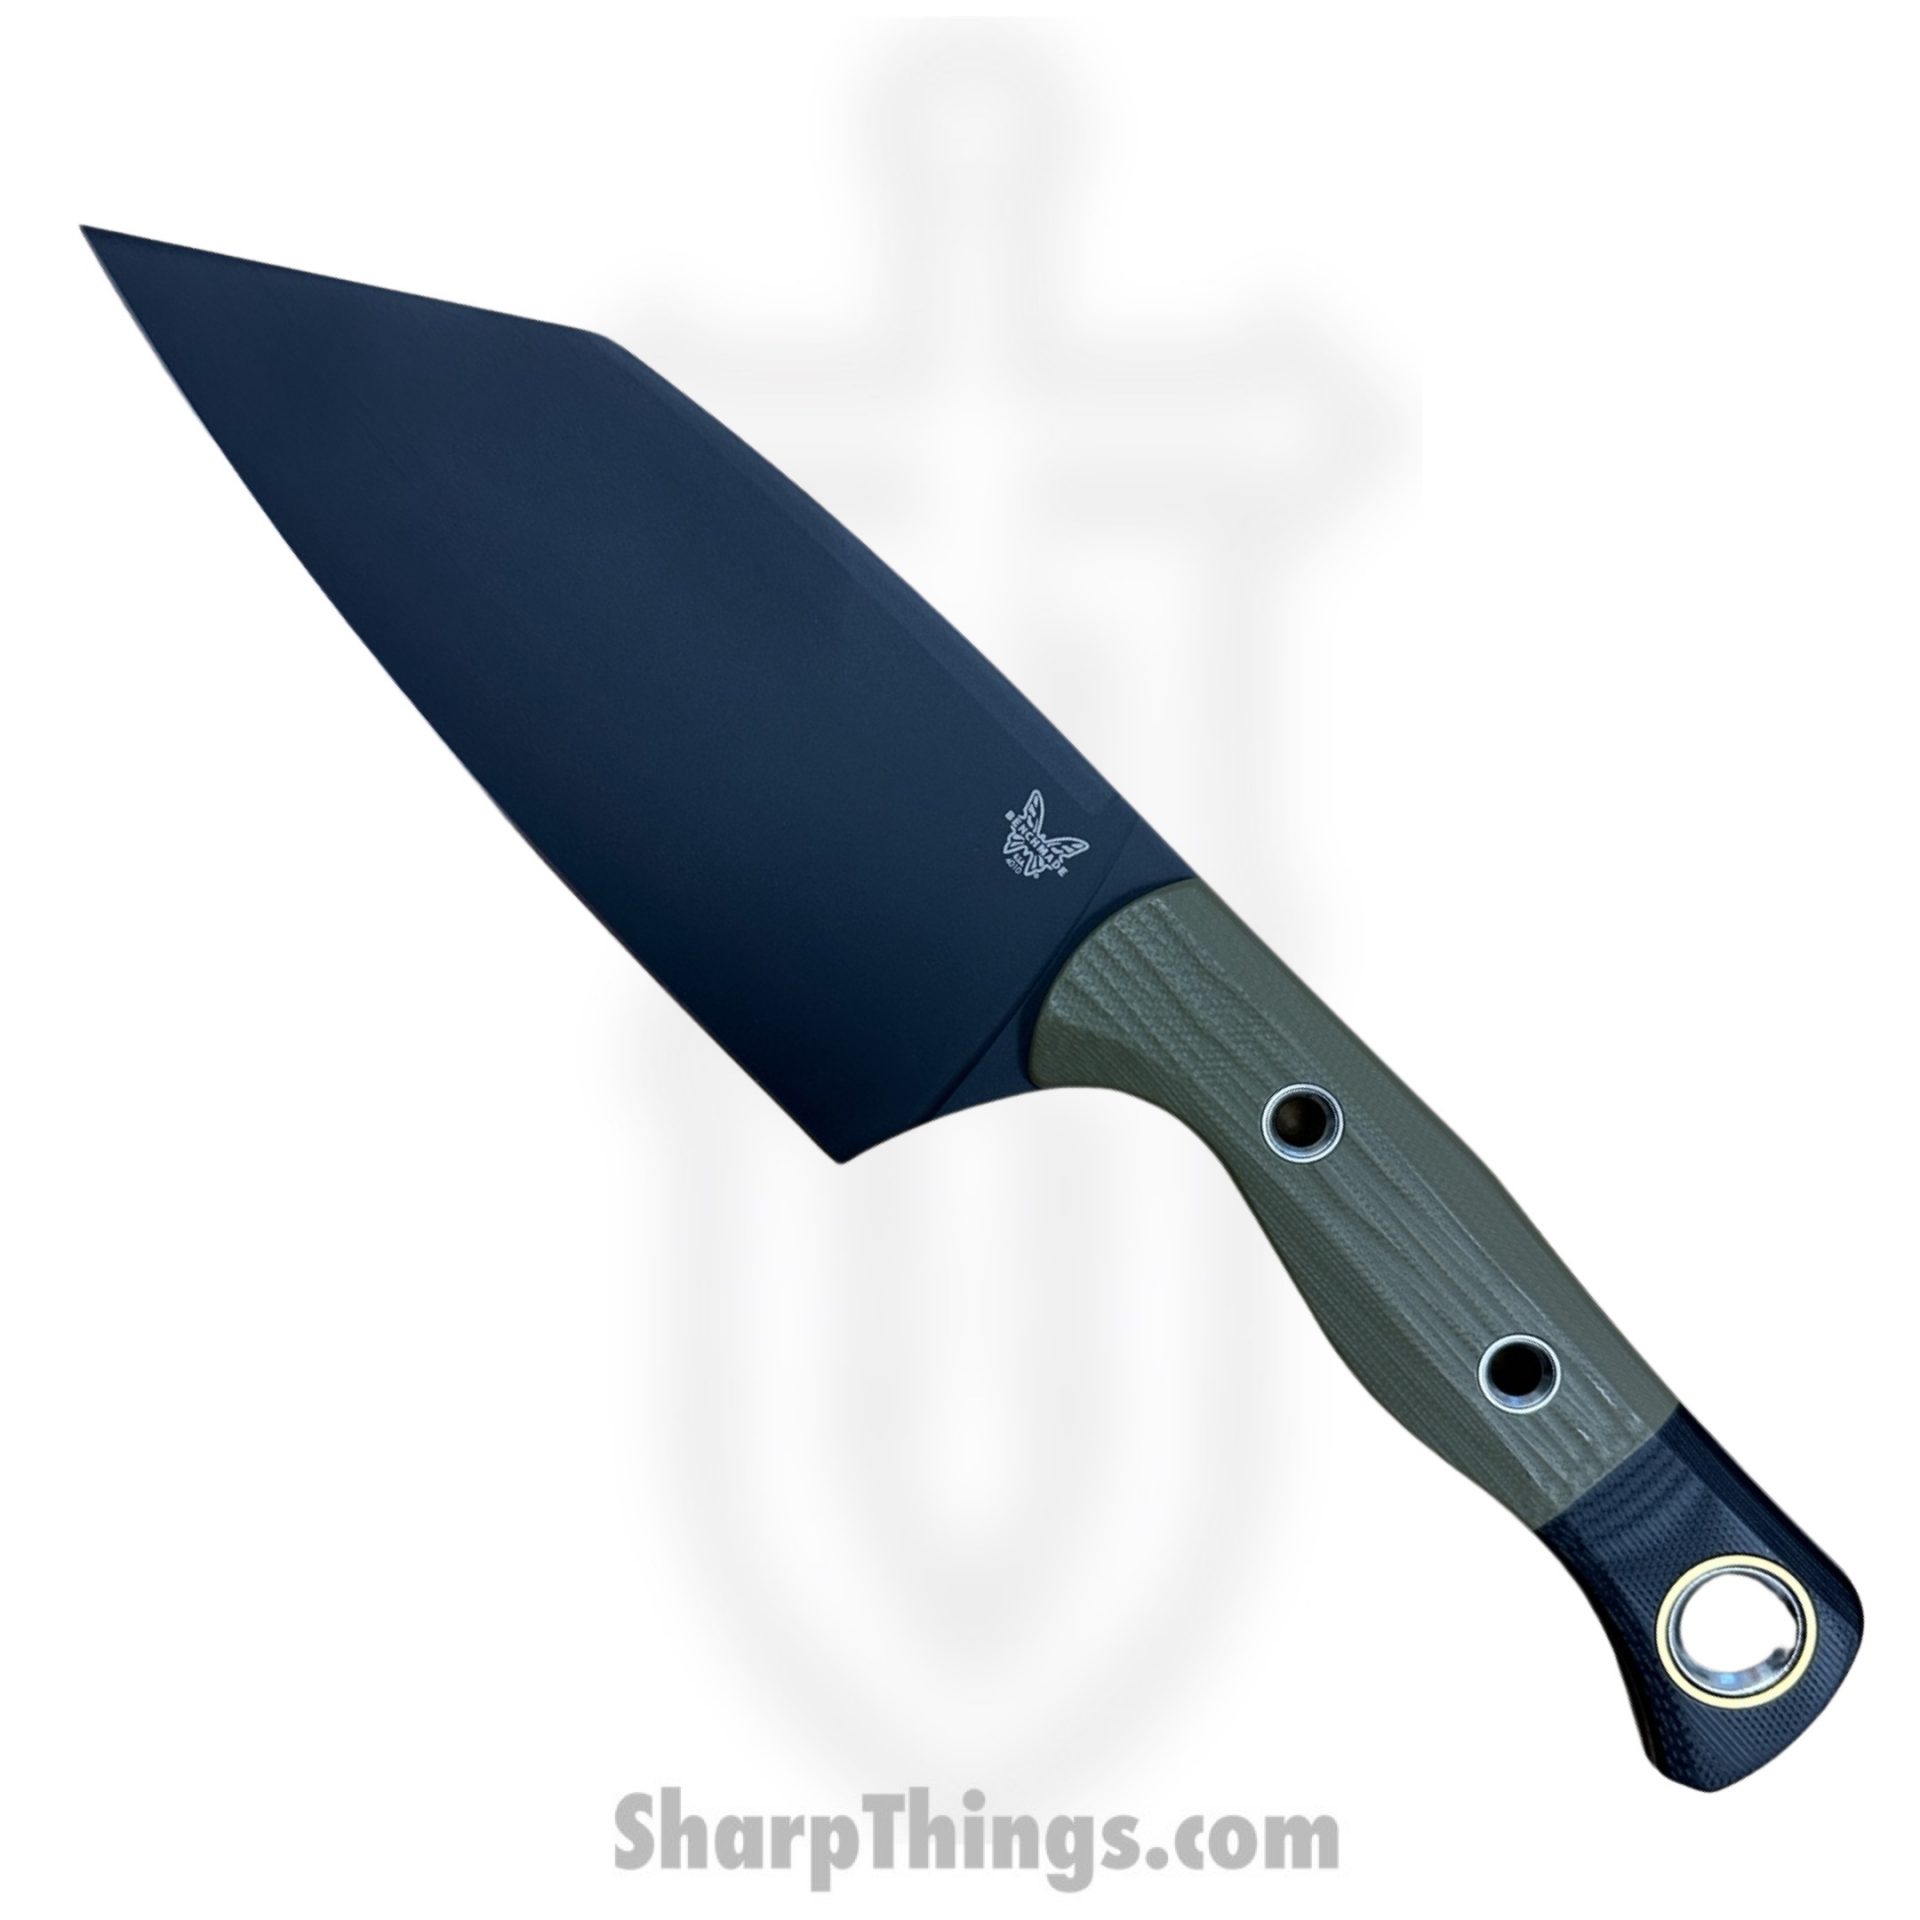 Benchmade - 4010BK-01 - Station Knife - Fixed Blade Knife - CPM